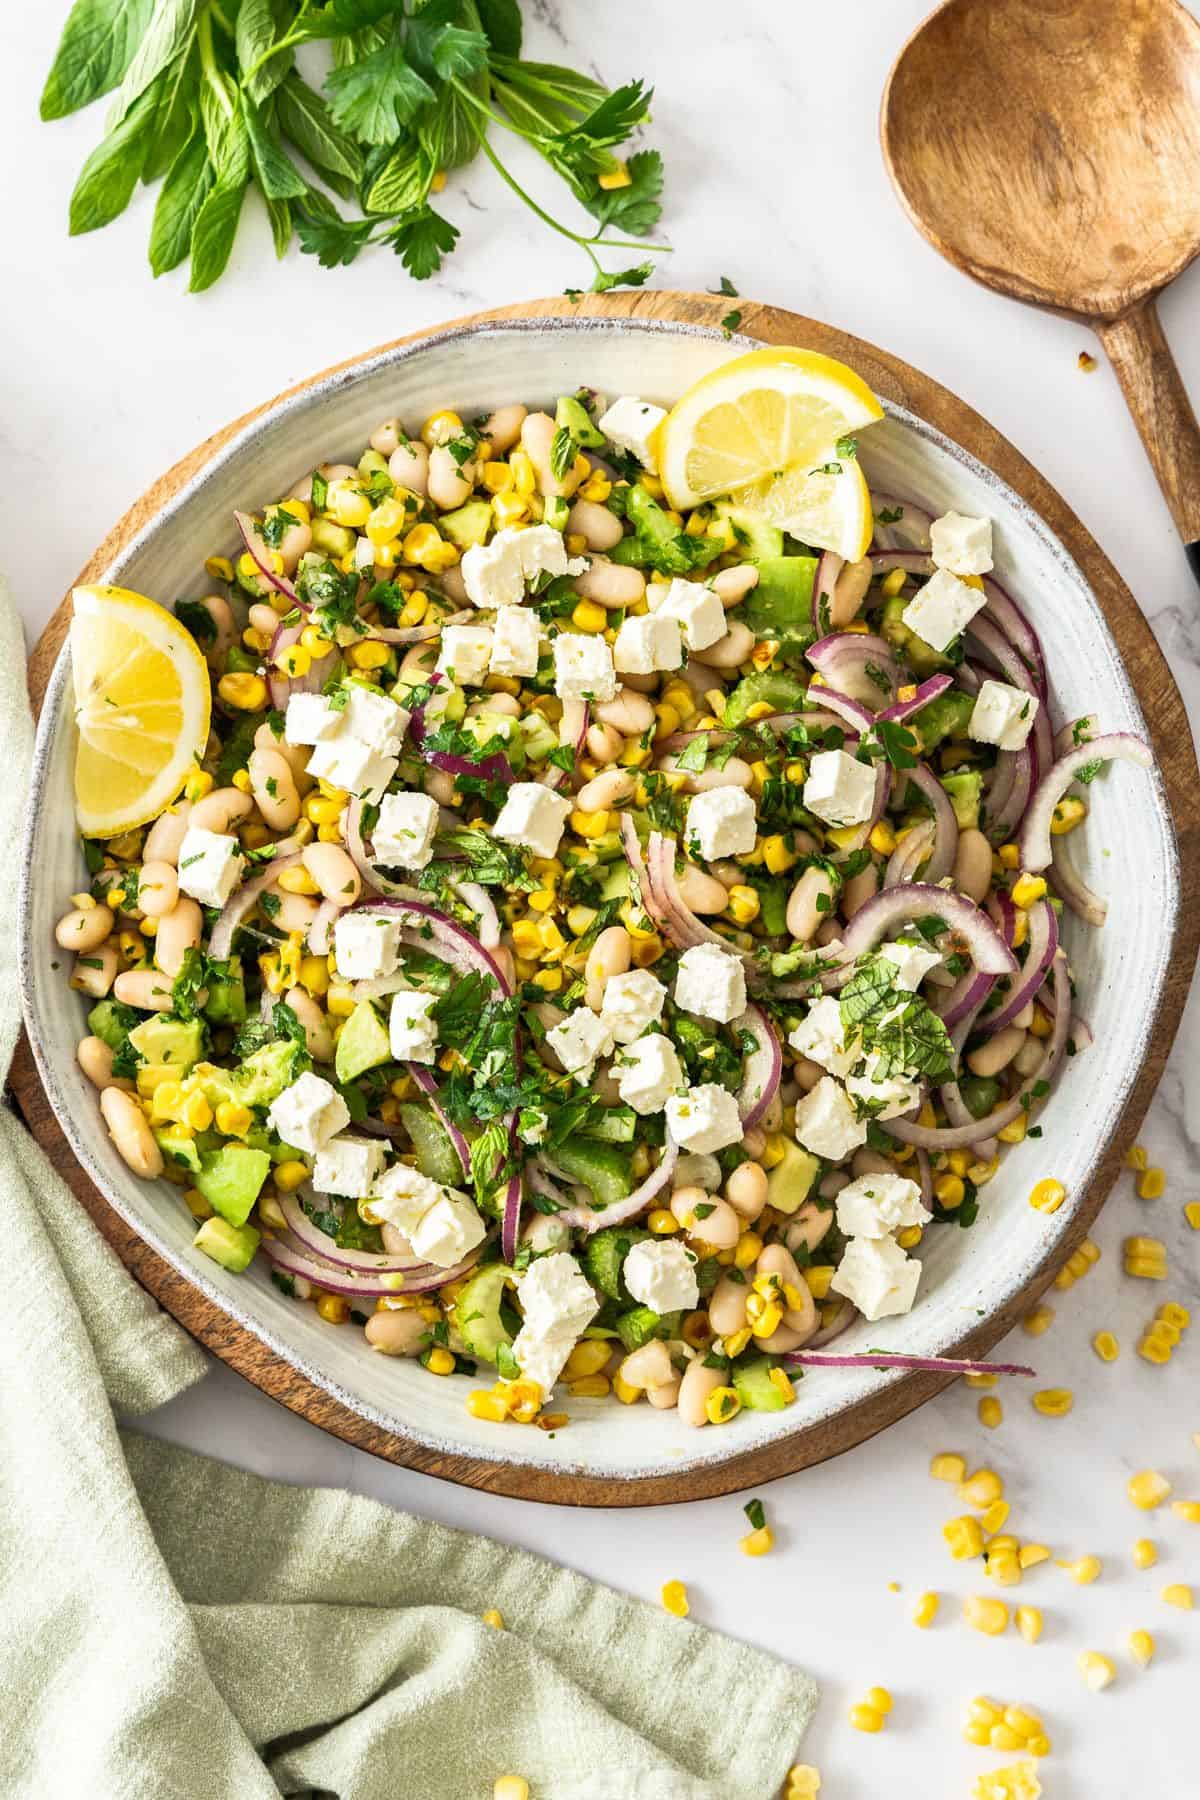 Round white bowl of Charred Corn Salad, with some lemon wedges on the side, and a wooden serving spoon.